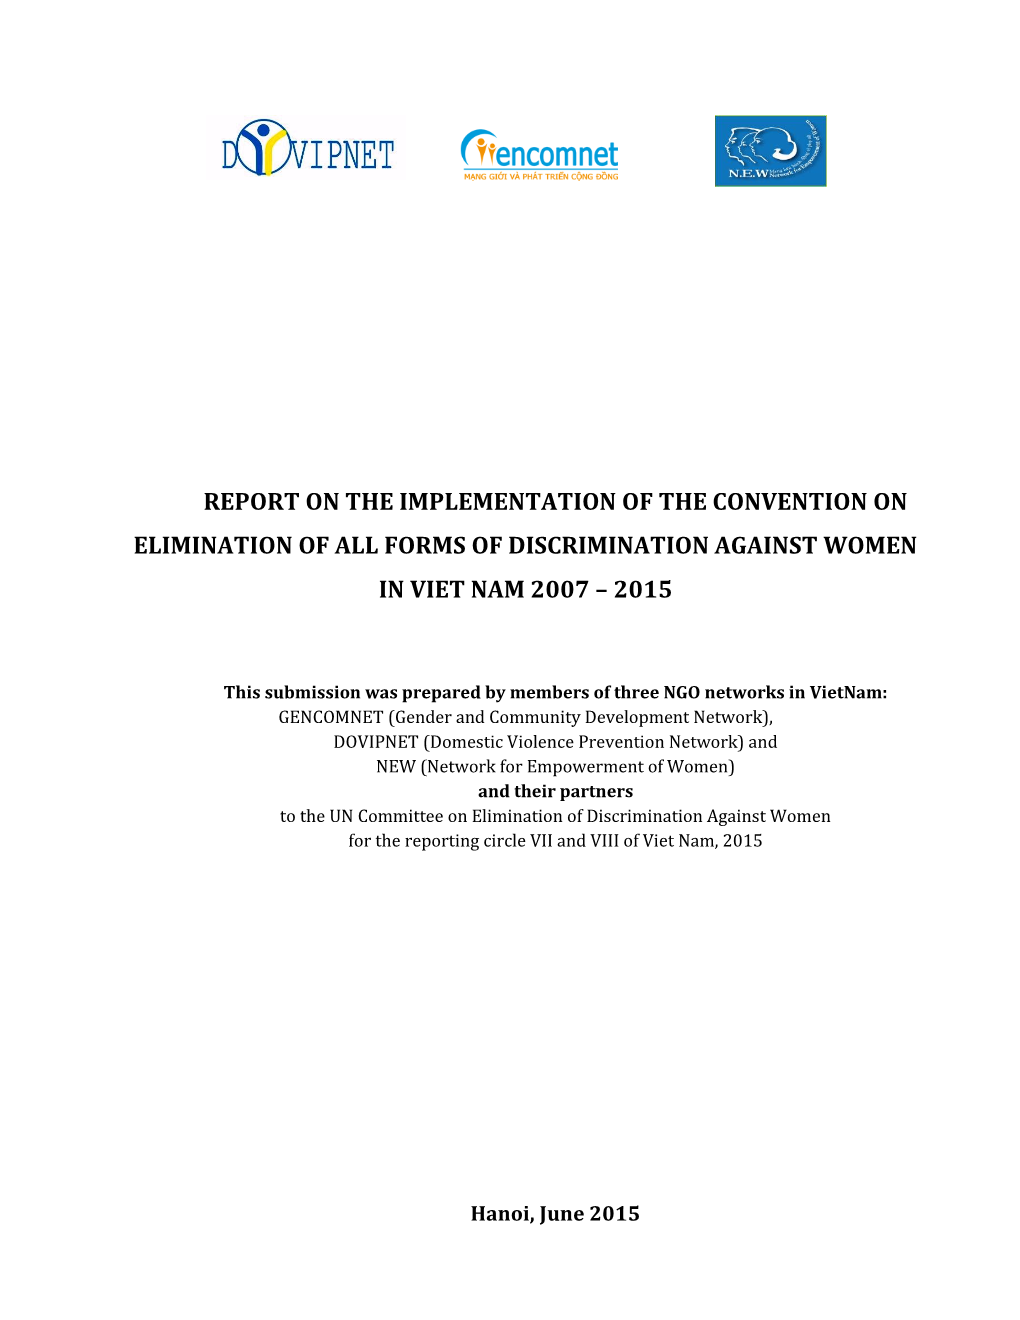 Report on the Implementation of the Convention on Elimination of All Forms of Discrimination Against Women in Viet Nam 2007 – 2015